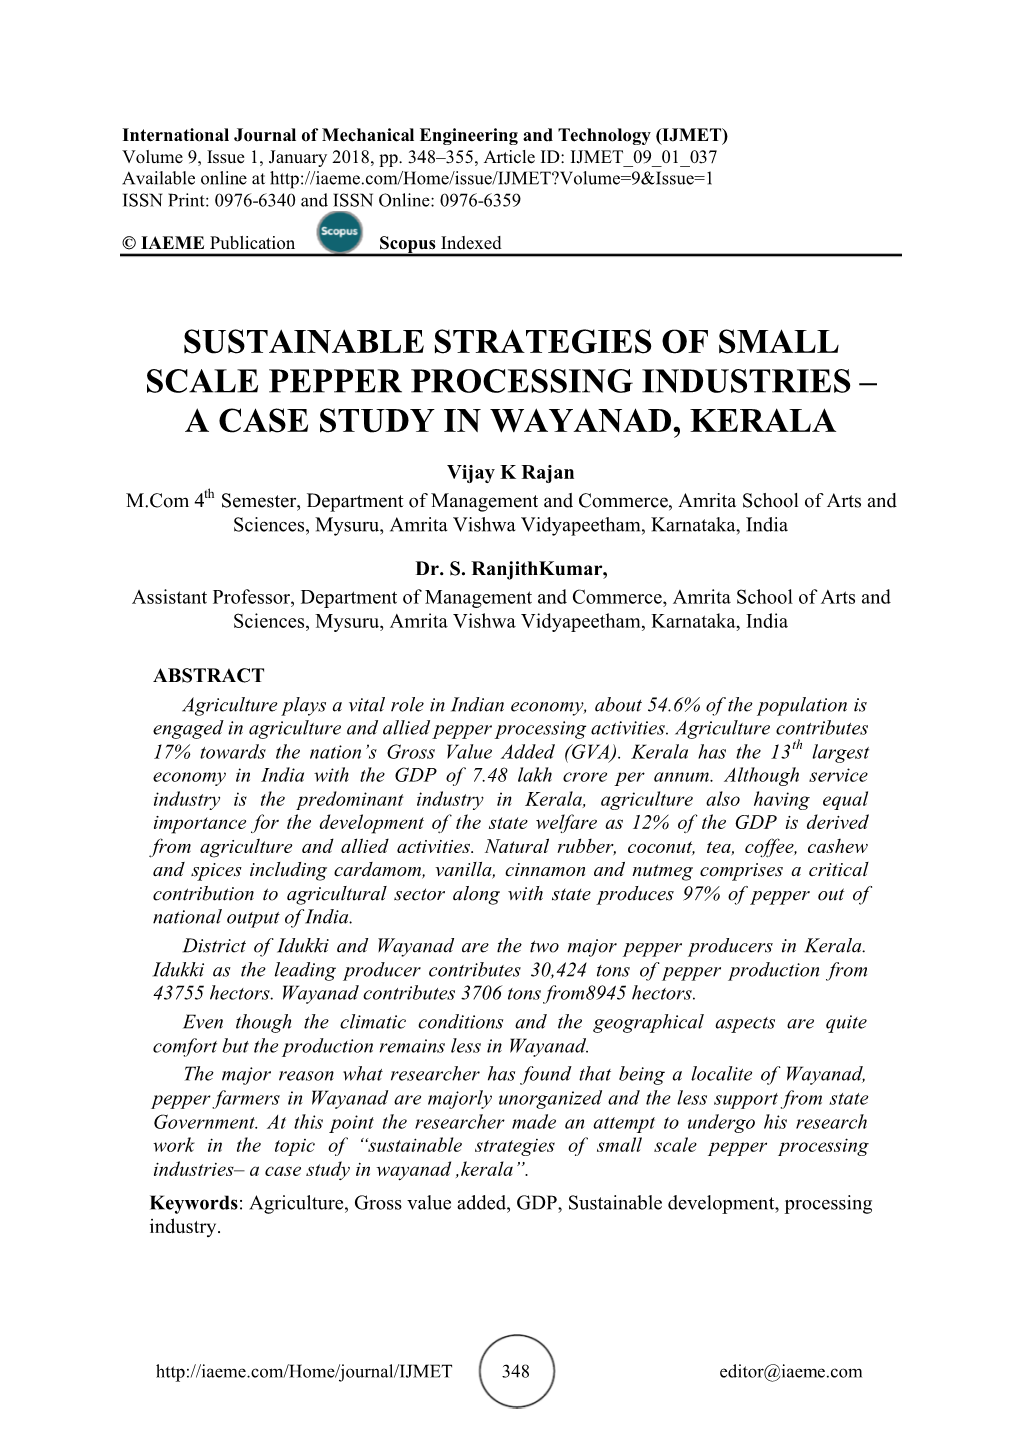 Sustainable Strategies of Small Scale Pepper Processing Industries – a Case Study in Wayanad, Kerala